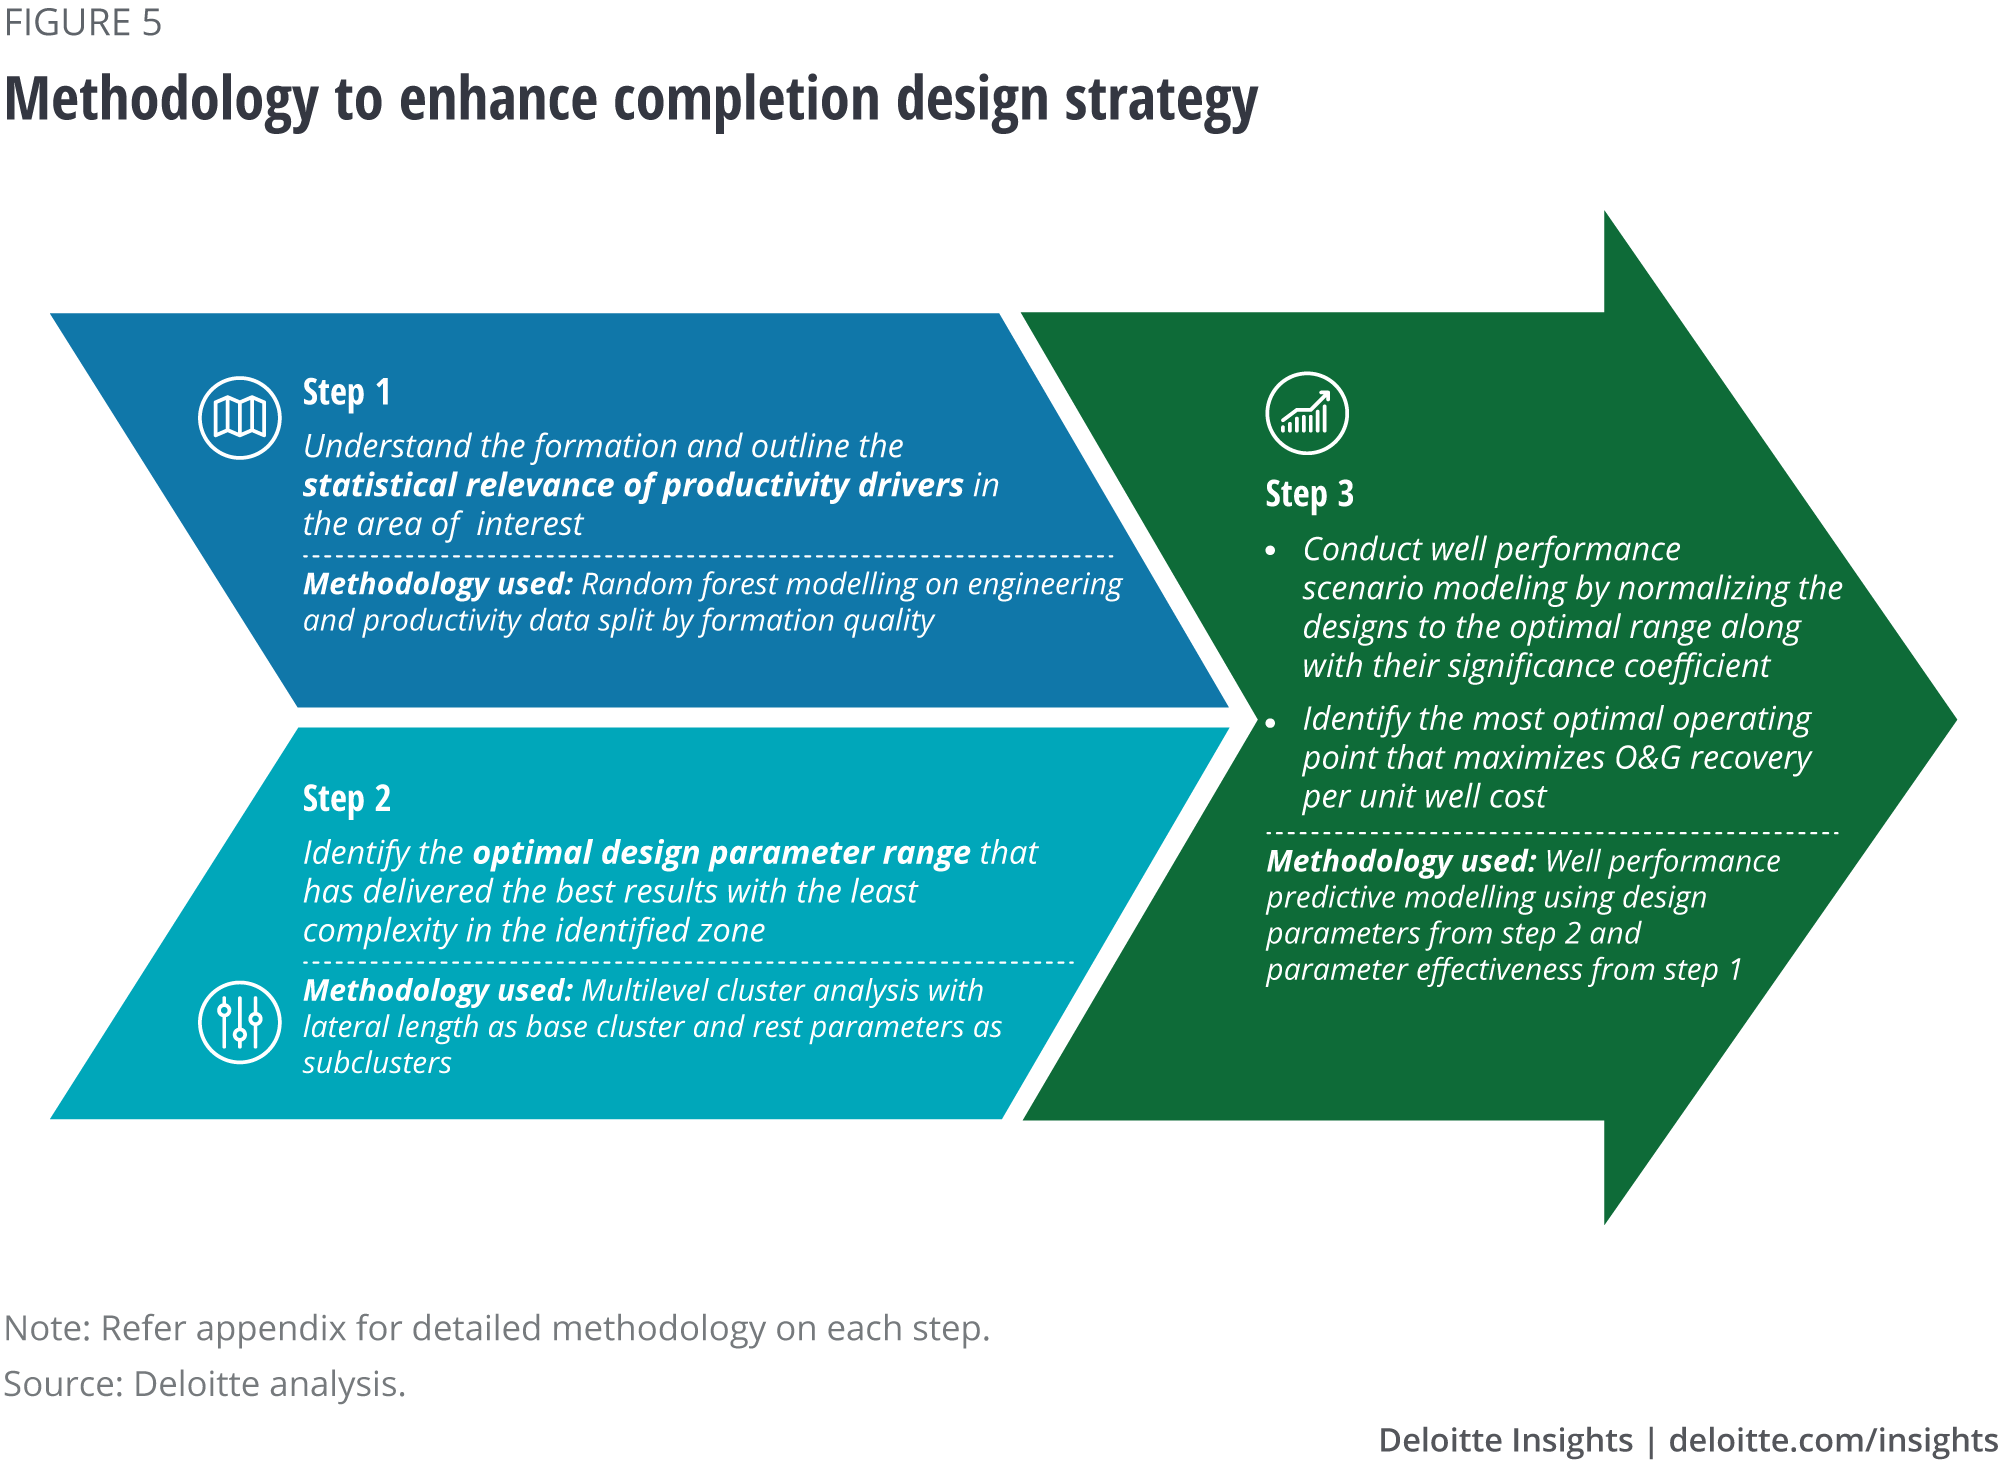 Methodology to enhance the completion design strategy